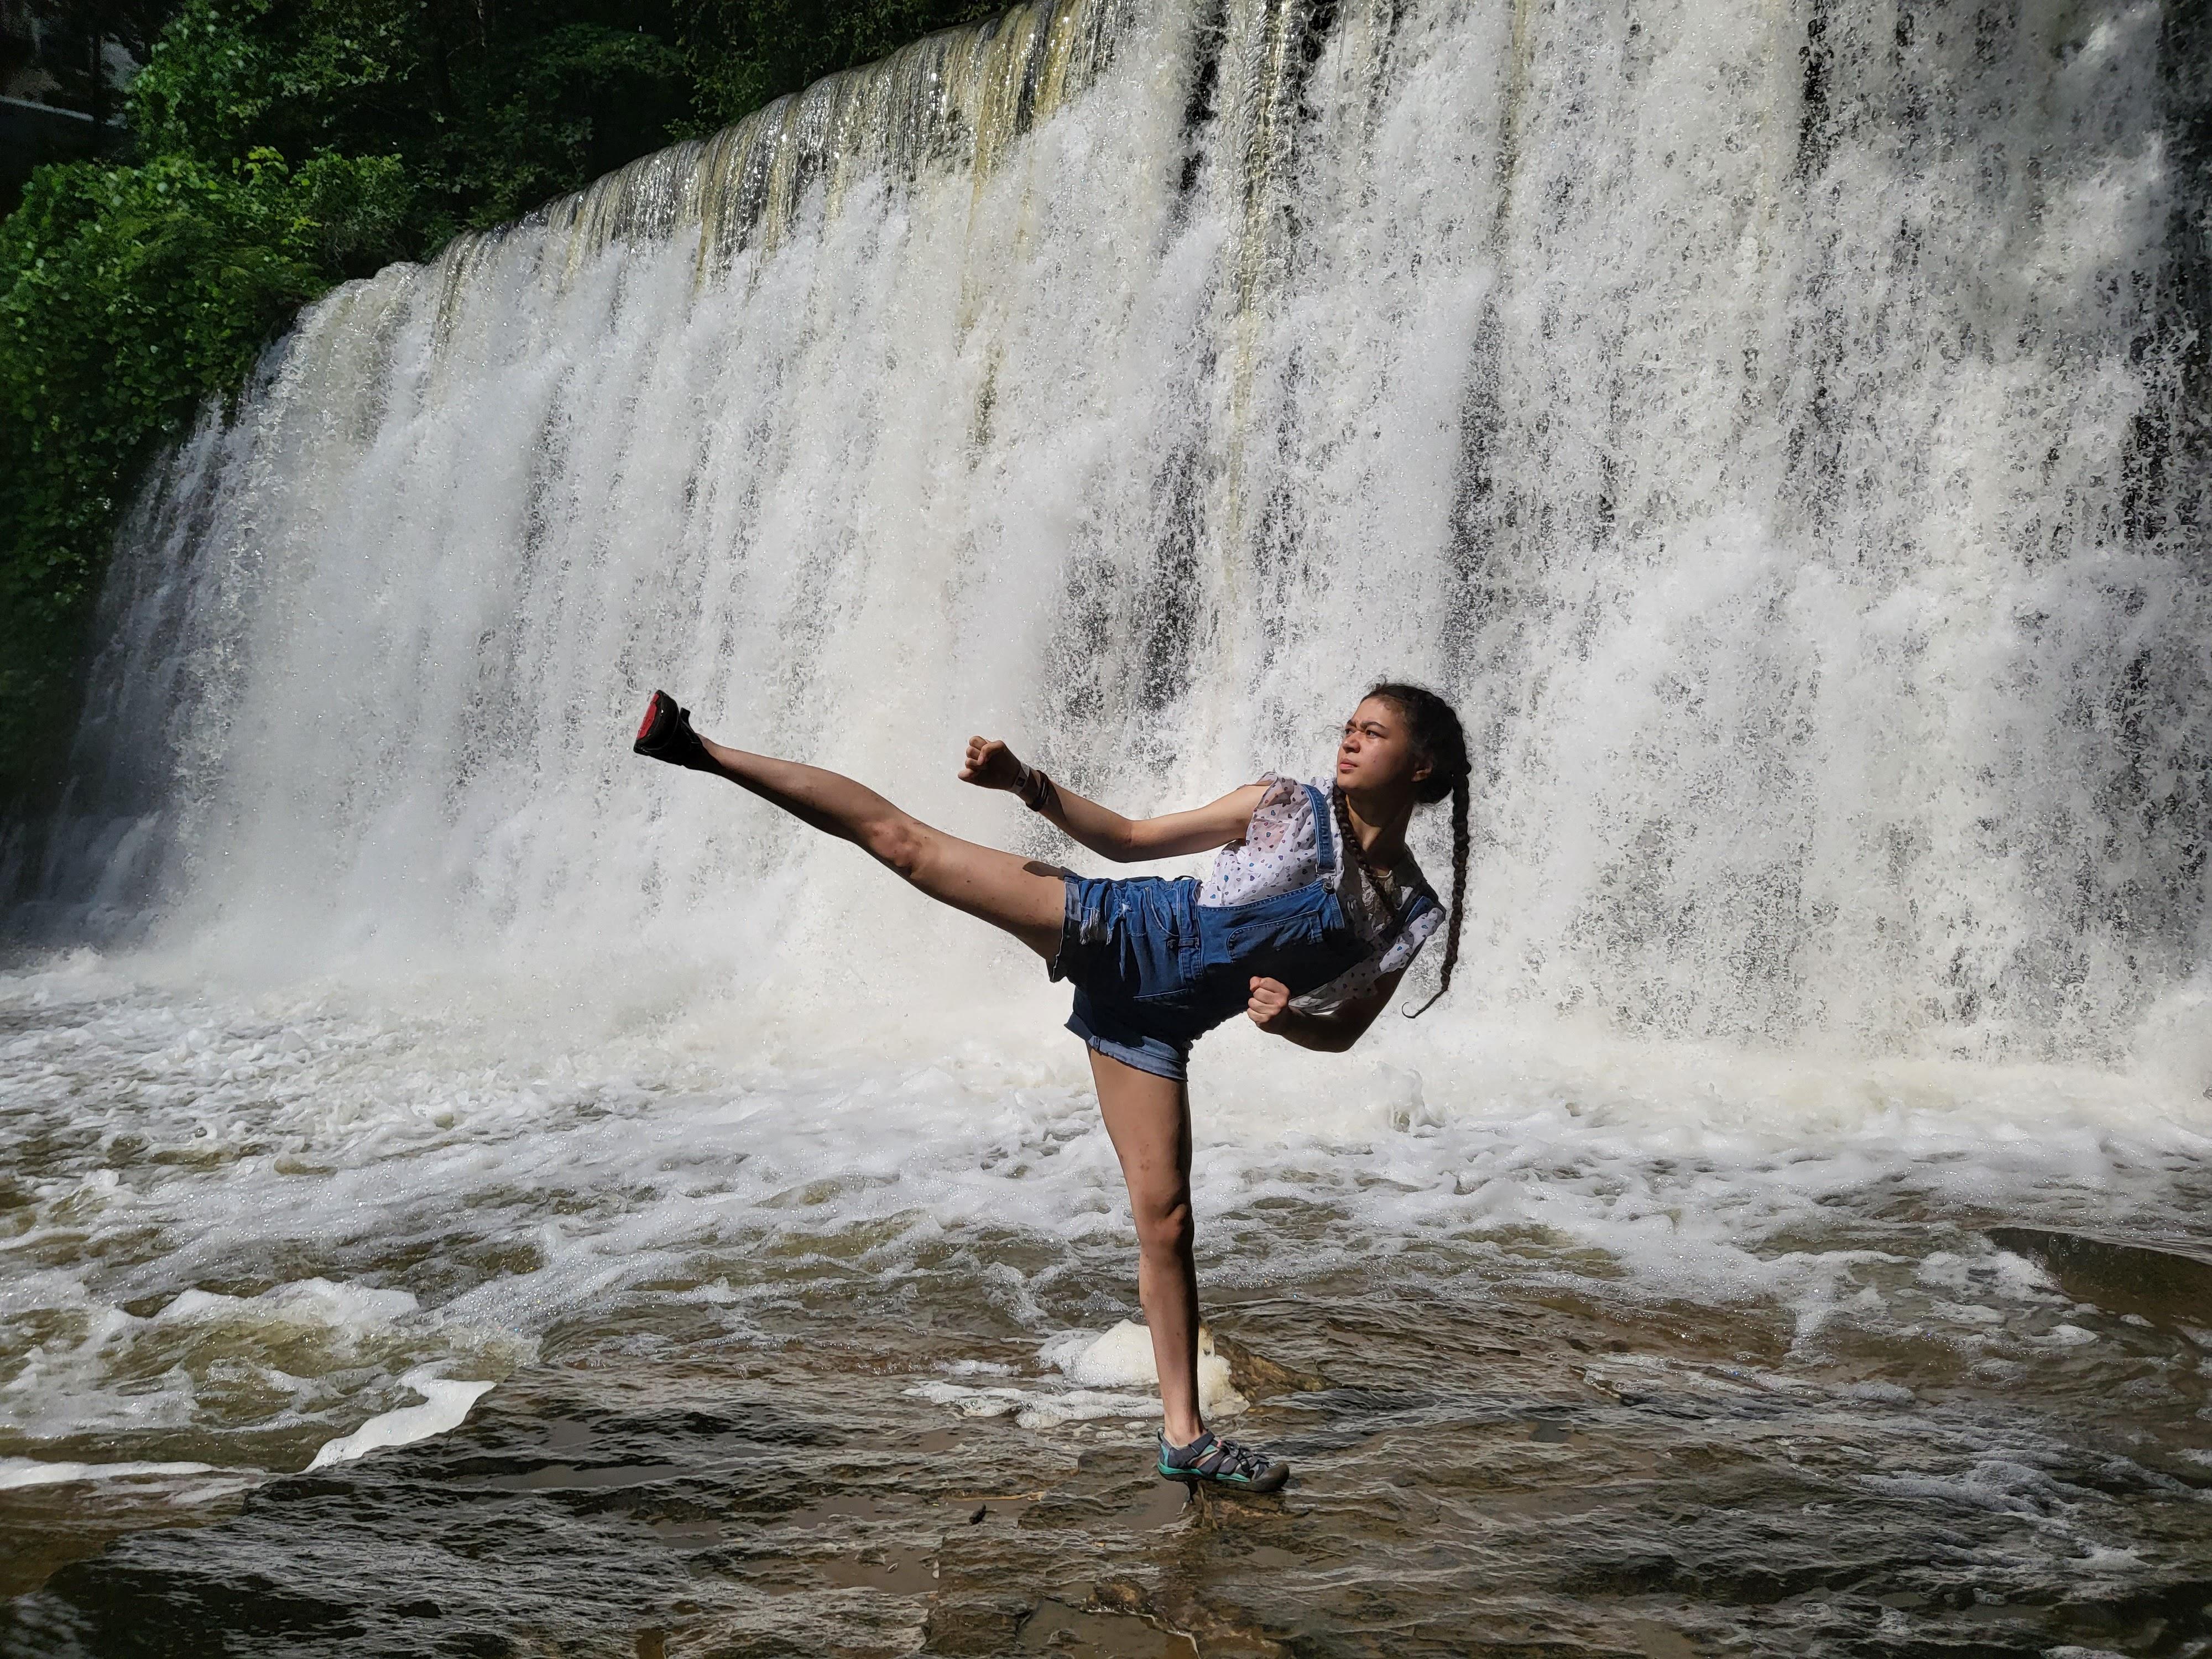 UHP student Natalia Hong doing a side kick in front of a waterfall